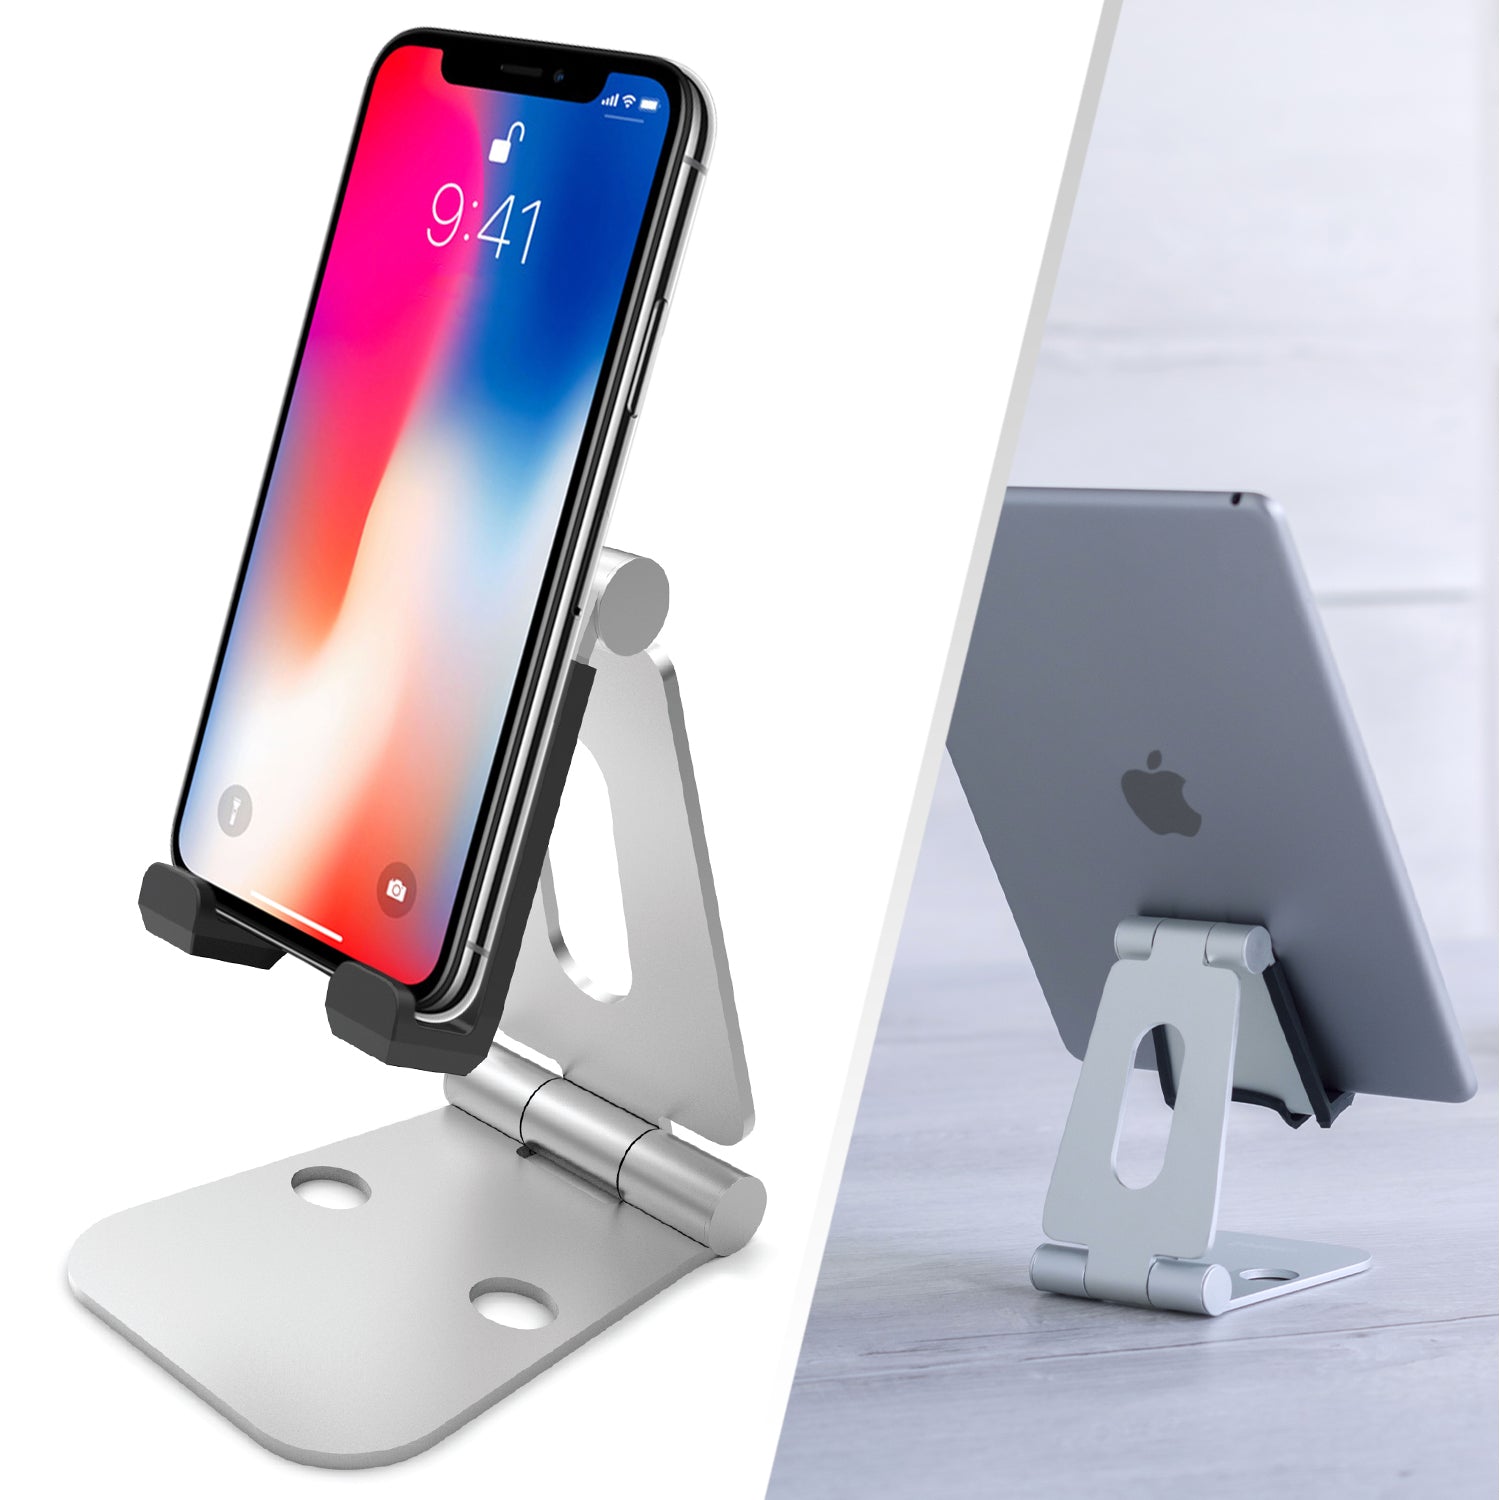 Split image of foldable aluminium desk stand. Left hand side shows iPhone facing forward in the stand, right image shows ipad from the rear. 